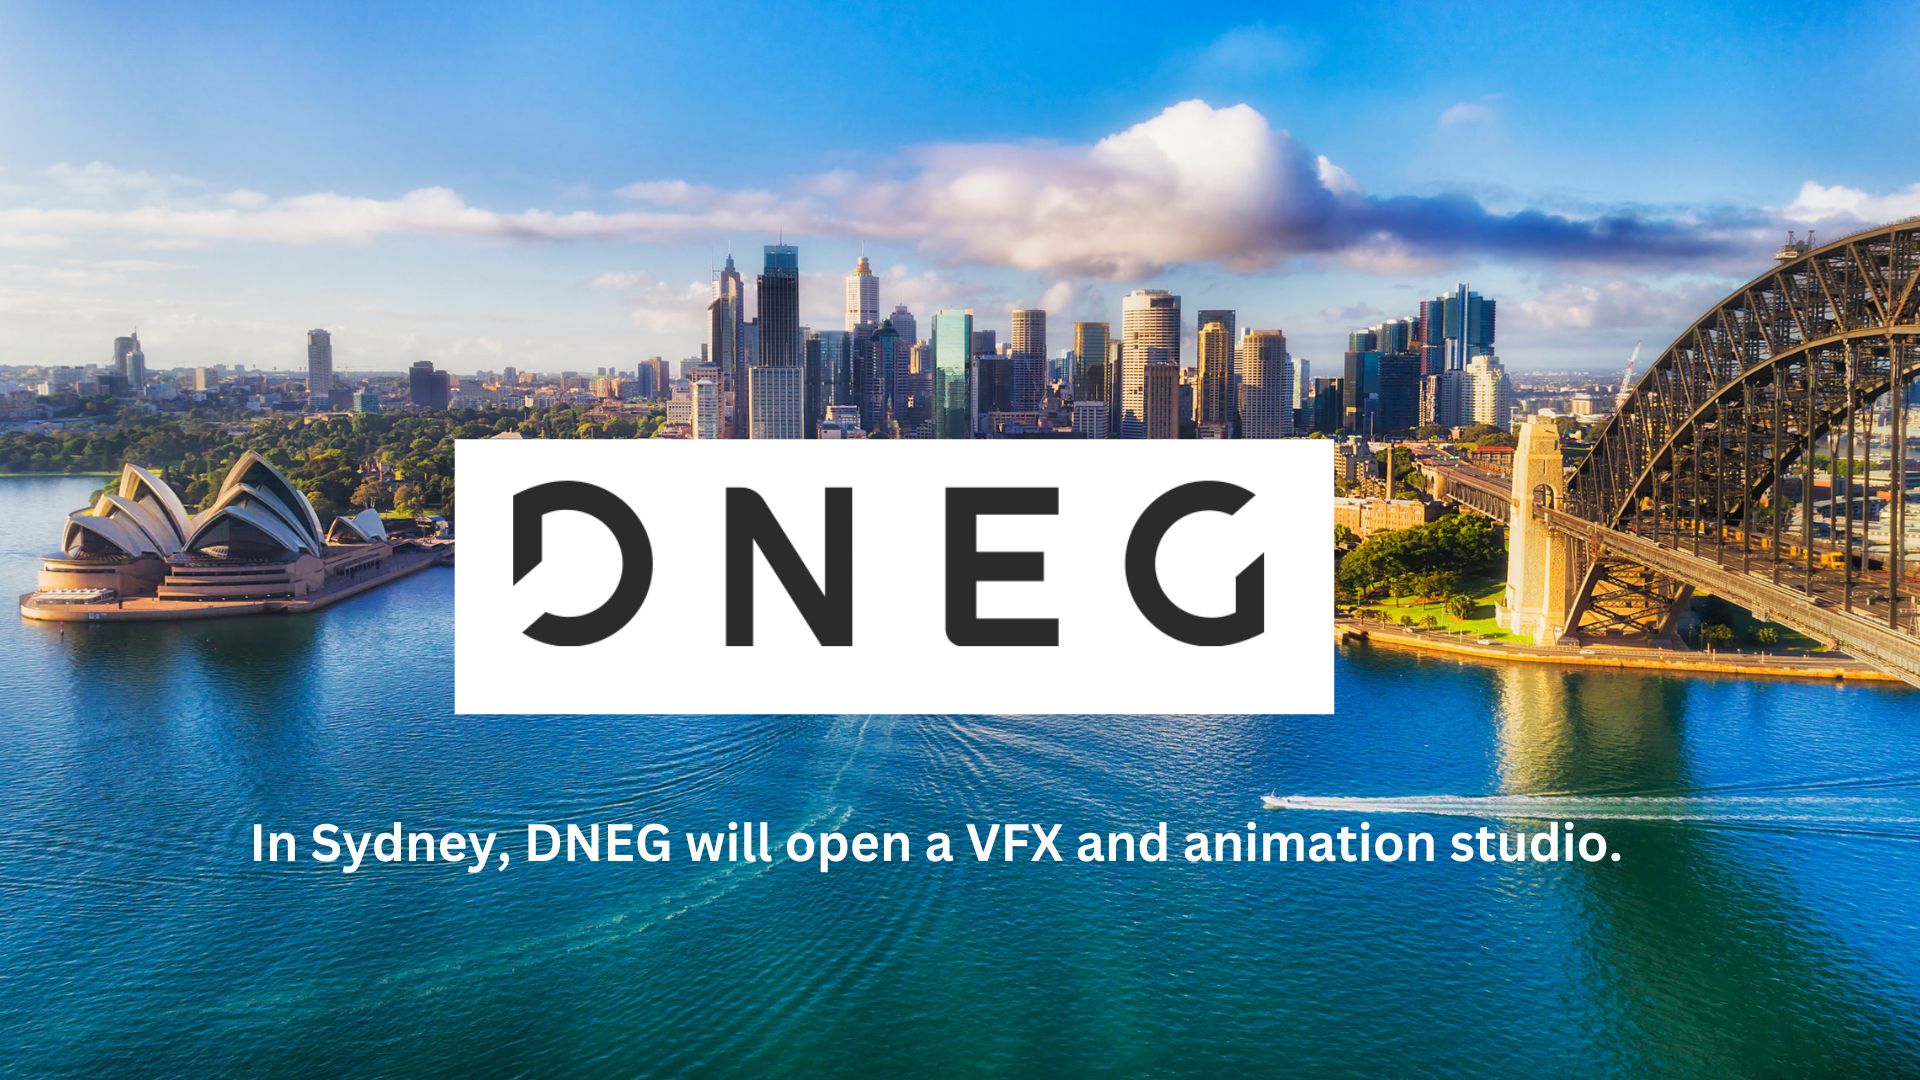 In Sydney, DNEG will open a VFX and animation studio. - vfxexpress